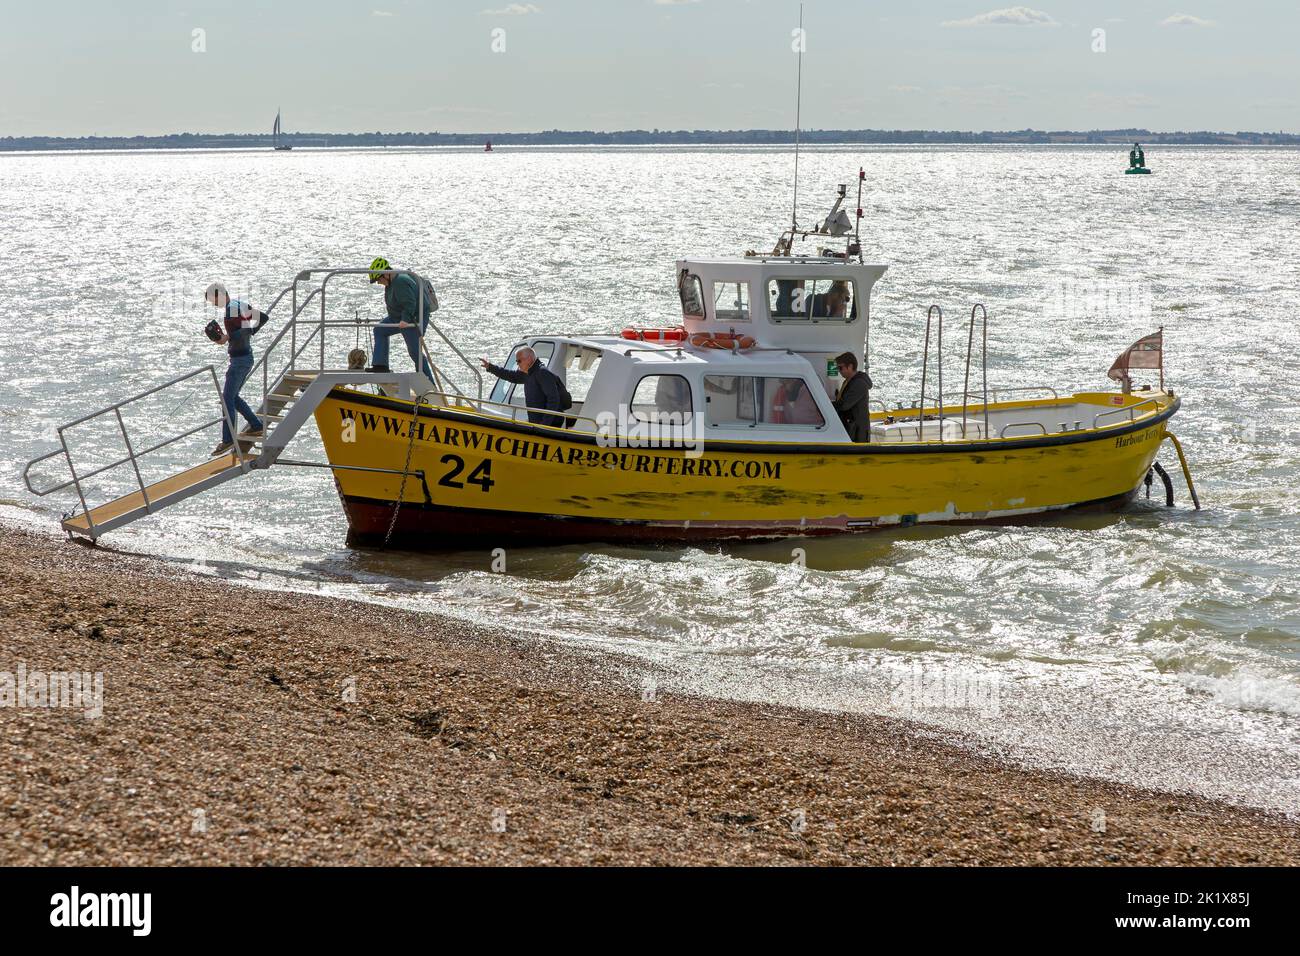 Harwich Harbour Ferry boat landed at Felixstowe, Suffolk,  England, UK Stock Photo